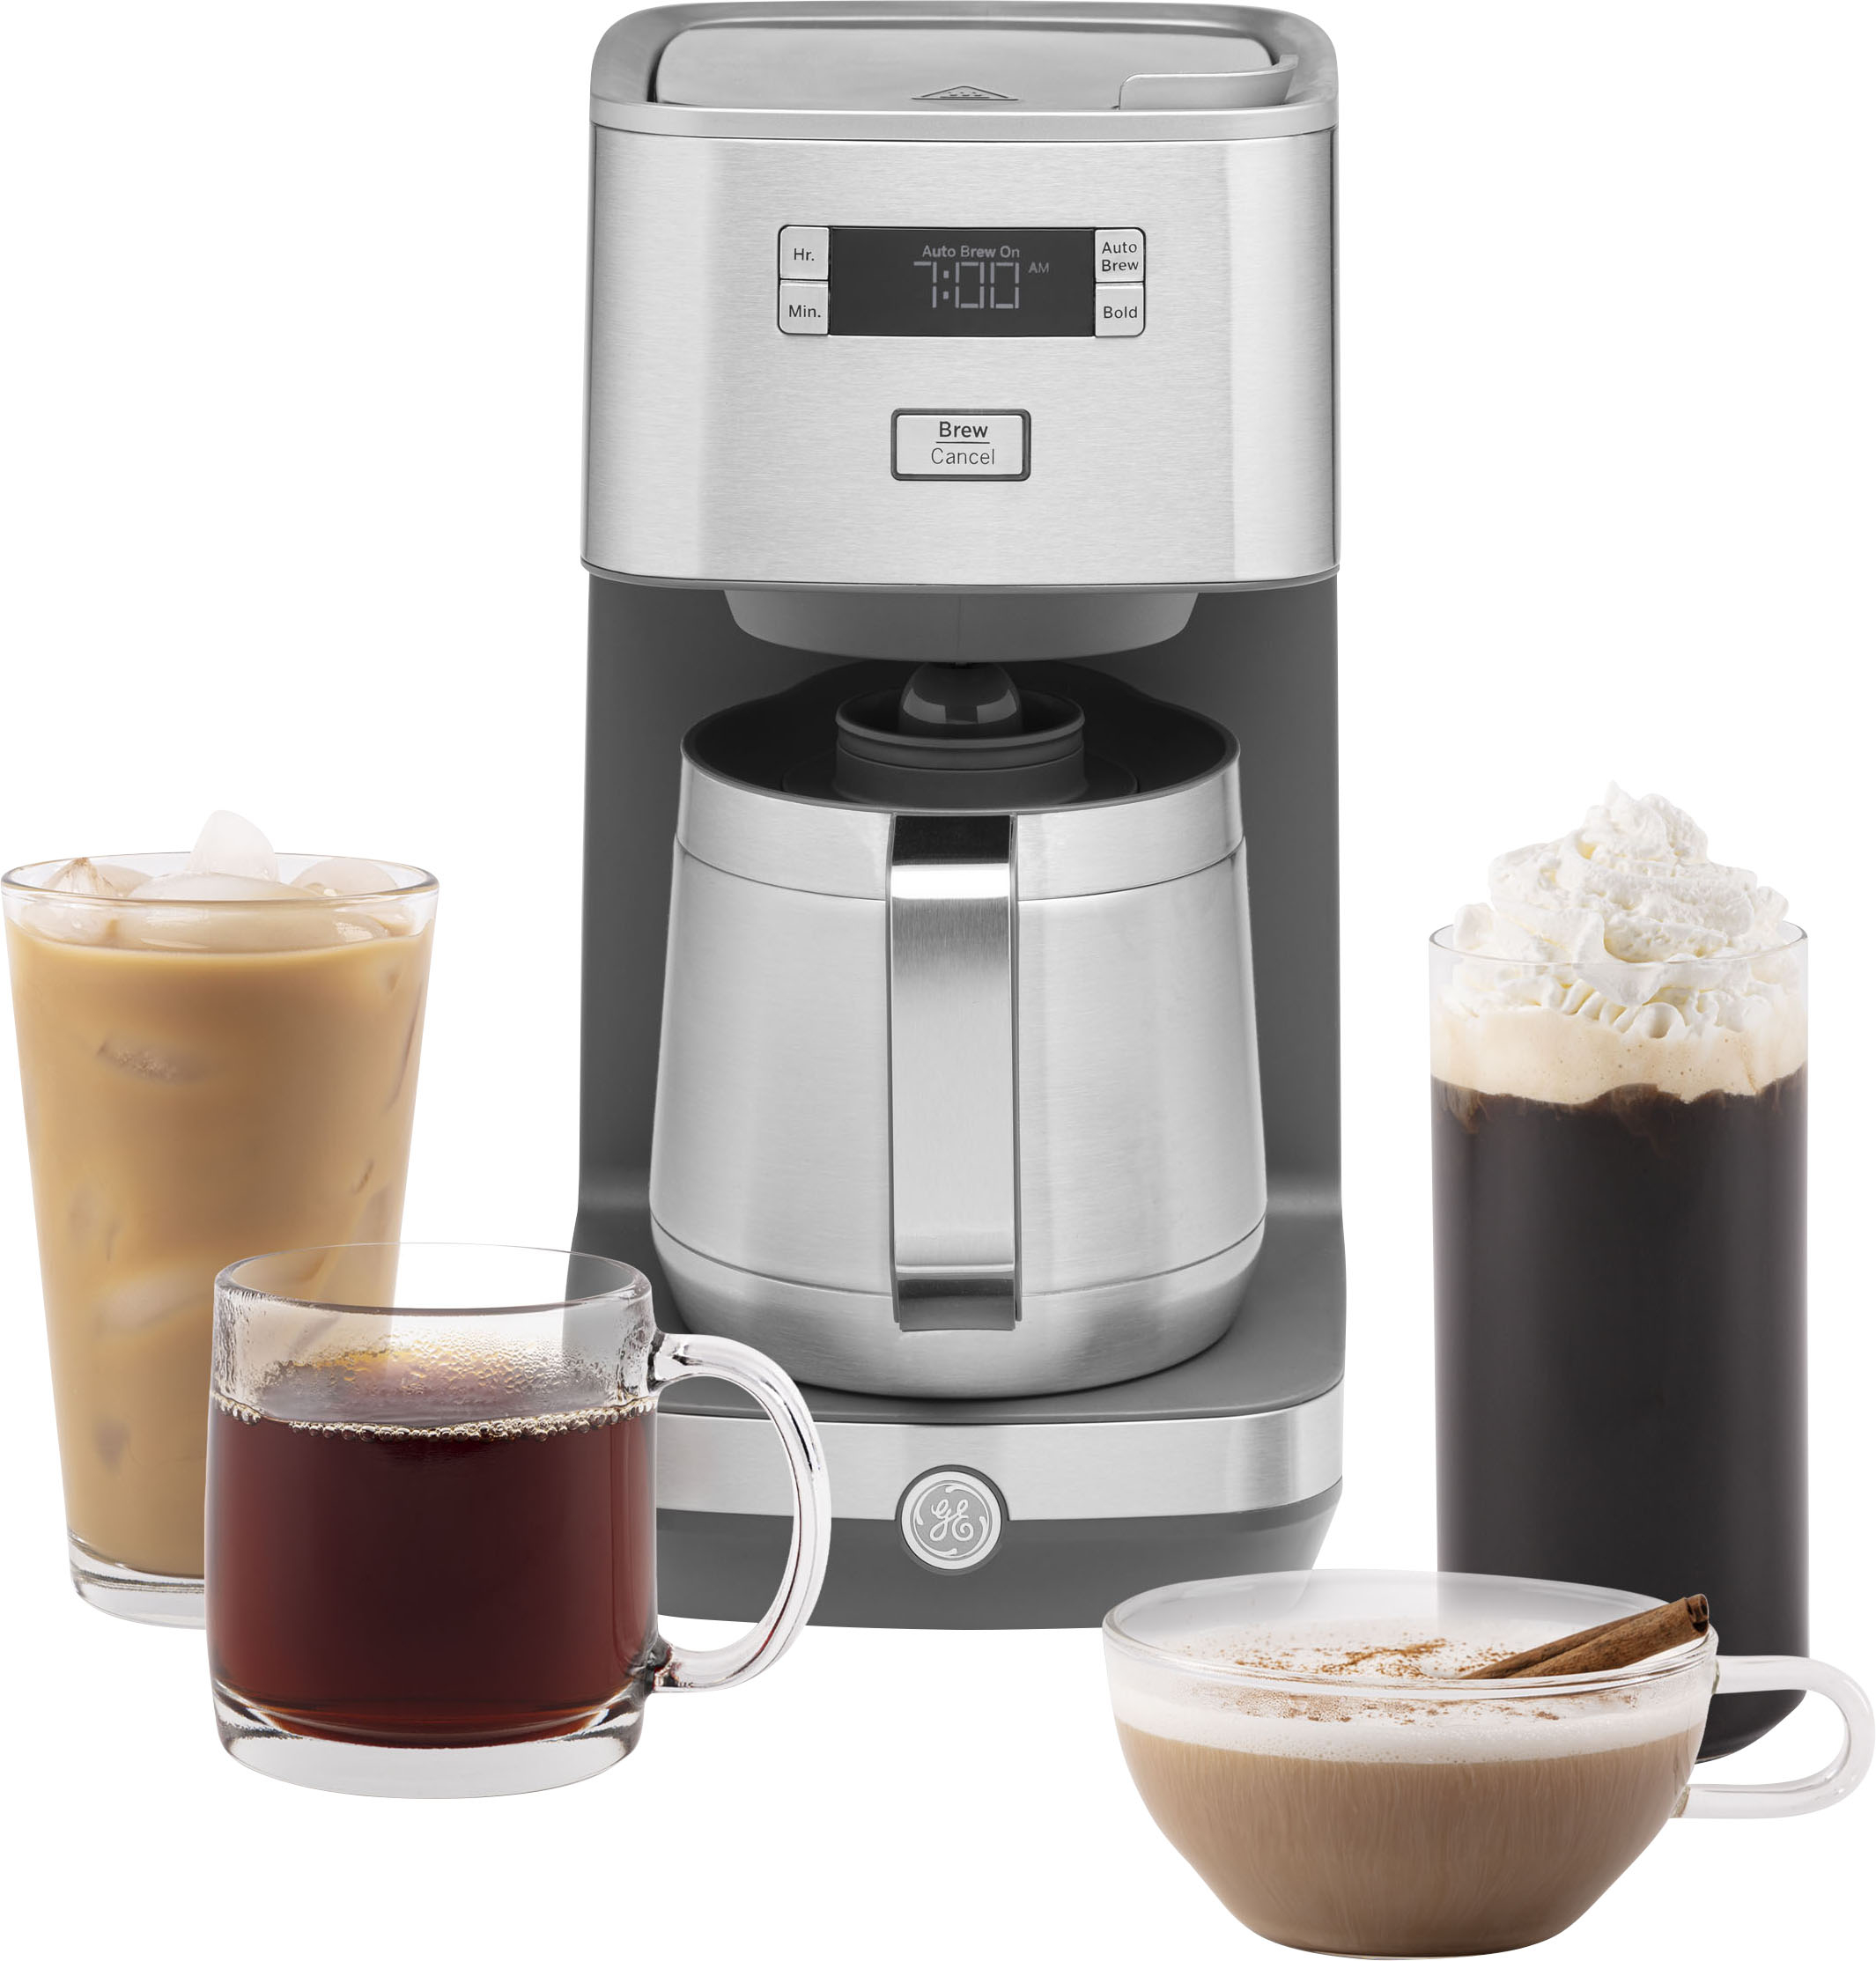 Coffee Maker Machines American Drip Coffee Brewer lot Espresso Cup All Colors